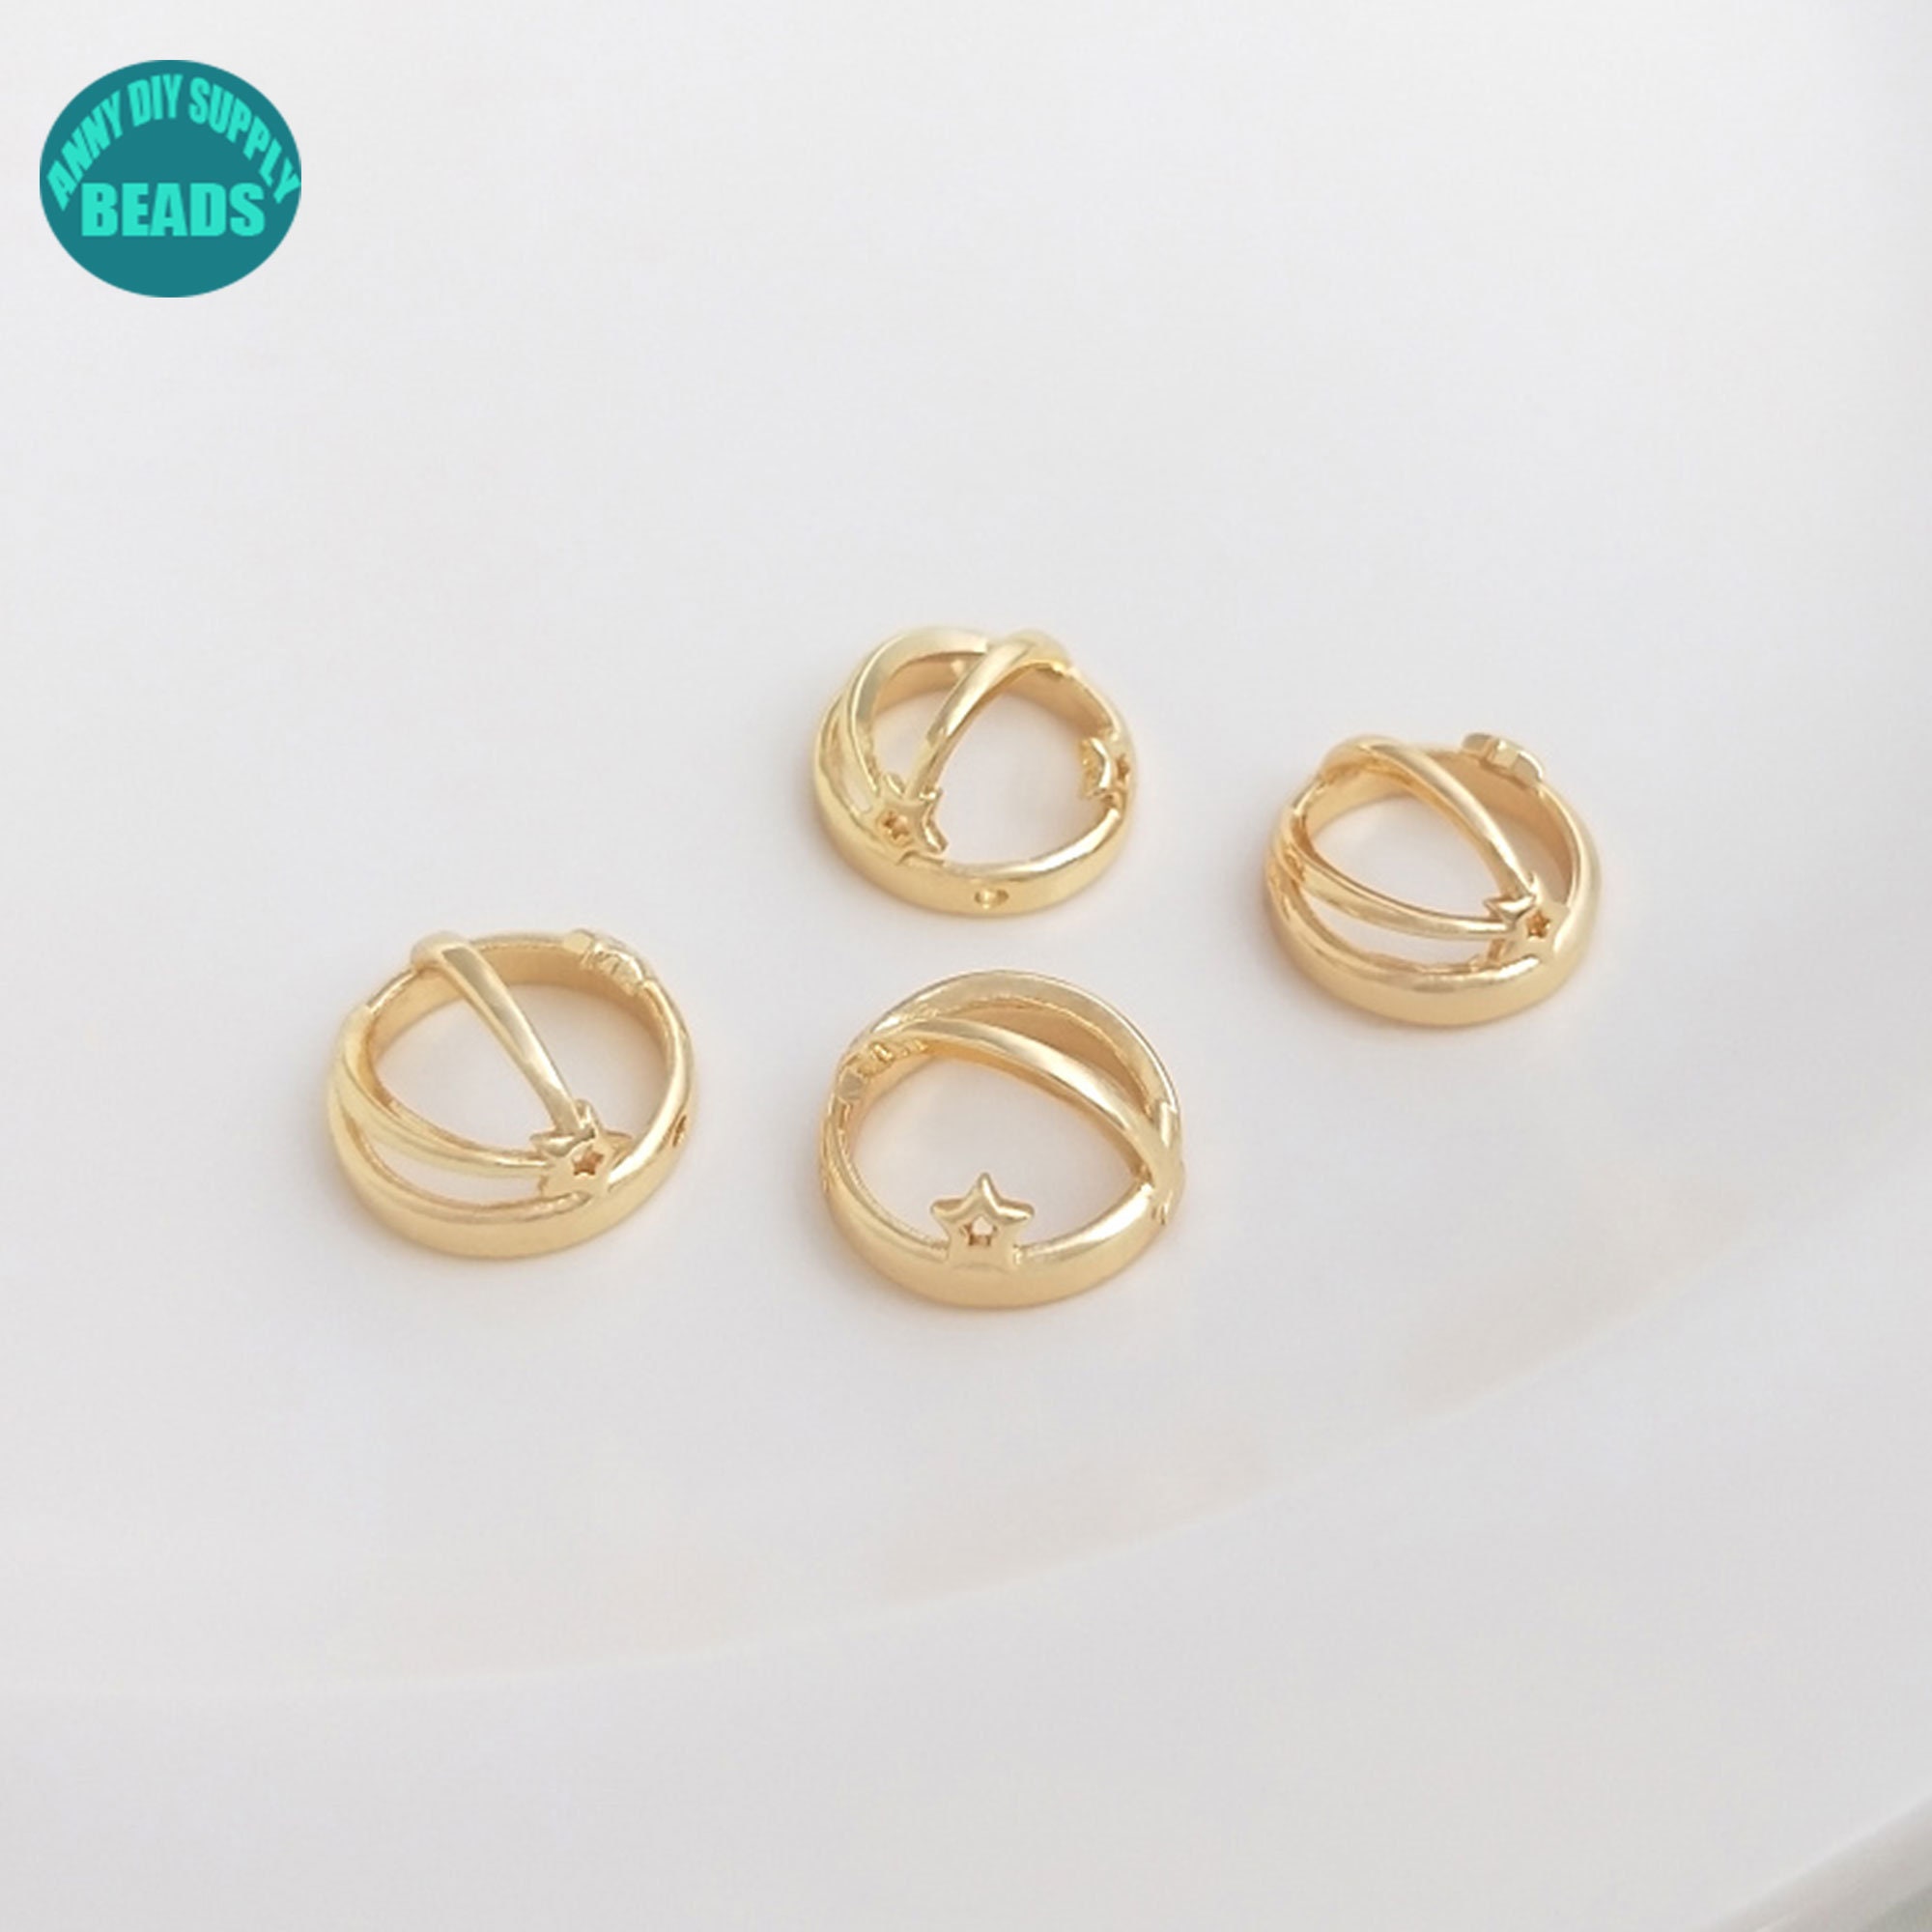 New 8mm 14K Gold Plated Brass Metal Luxury Flower Bead Caps For Jewelry  Making Component DIY Accessories Supplies End Bead Cap